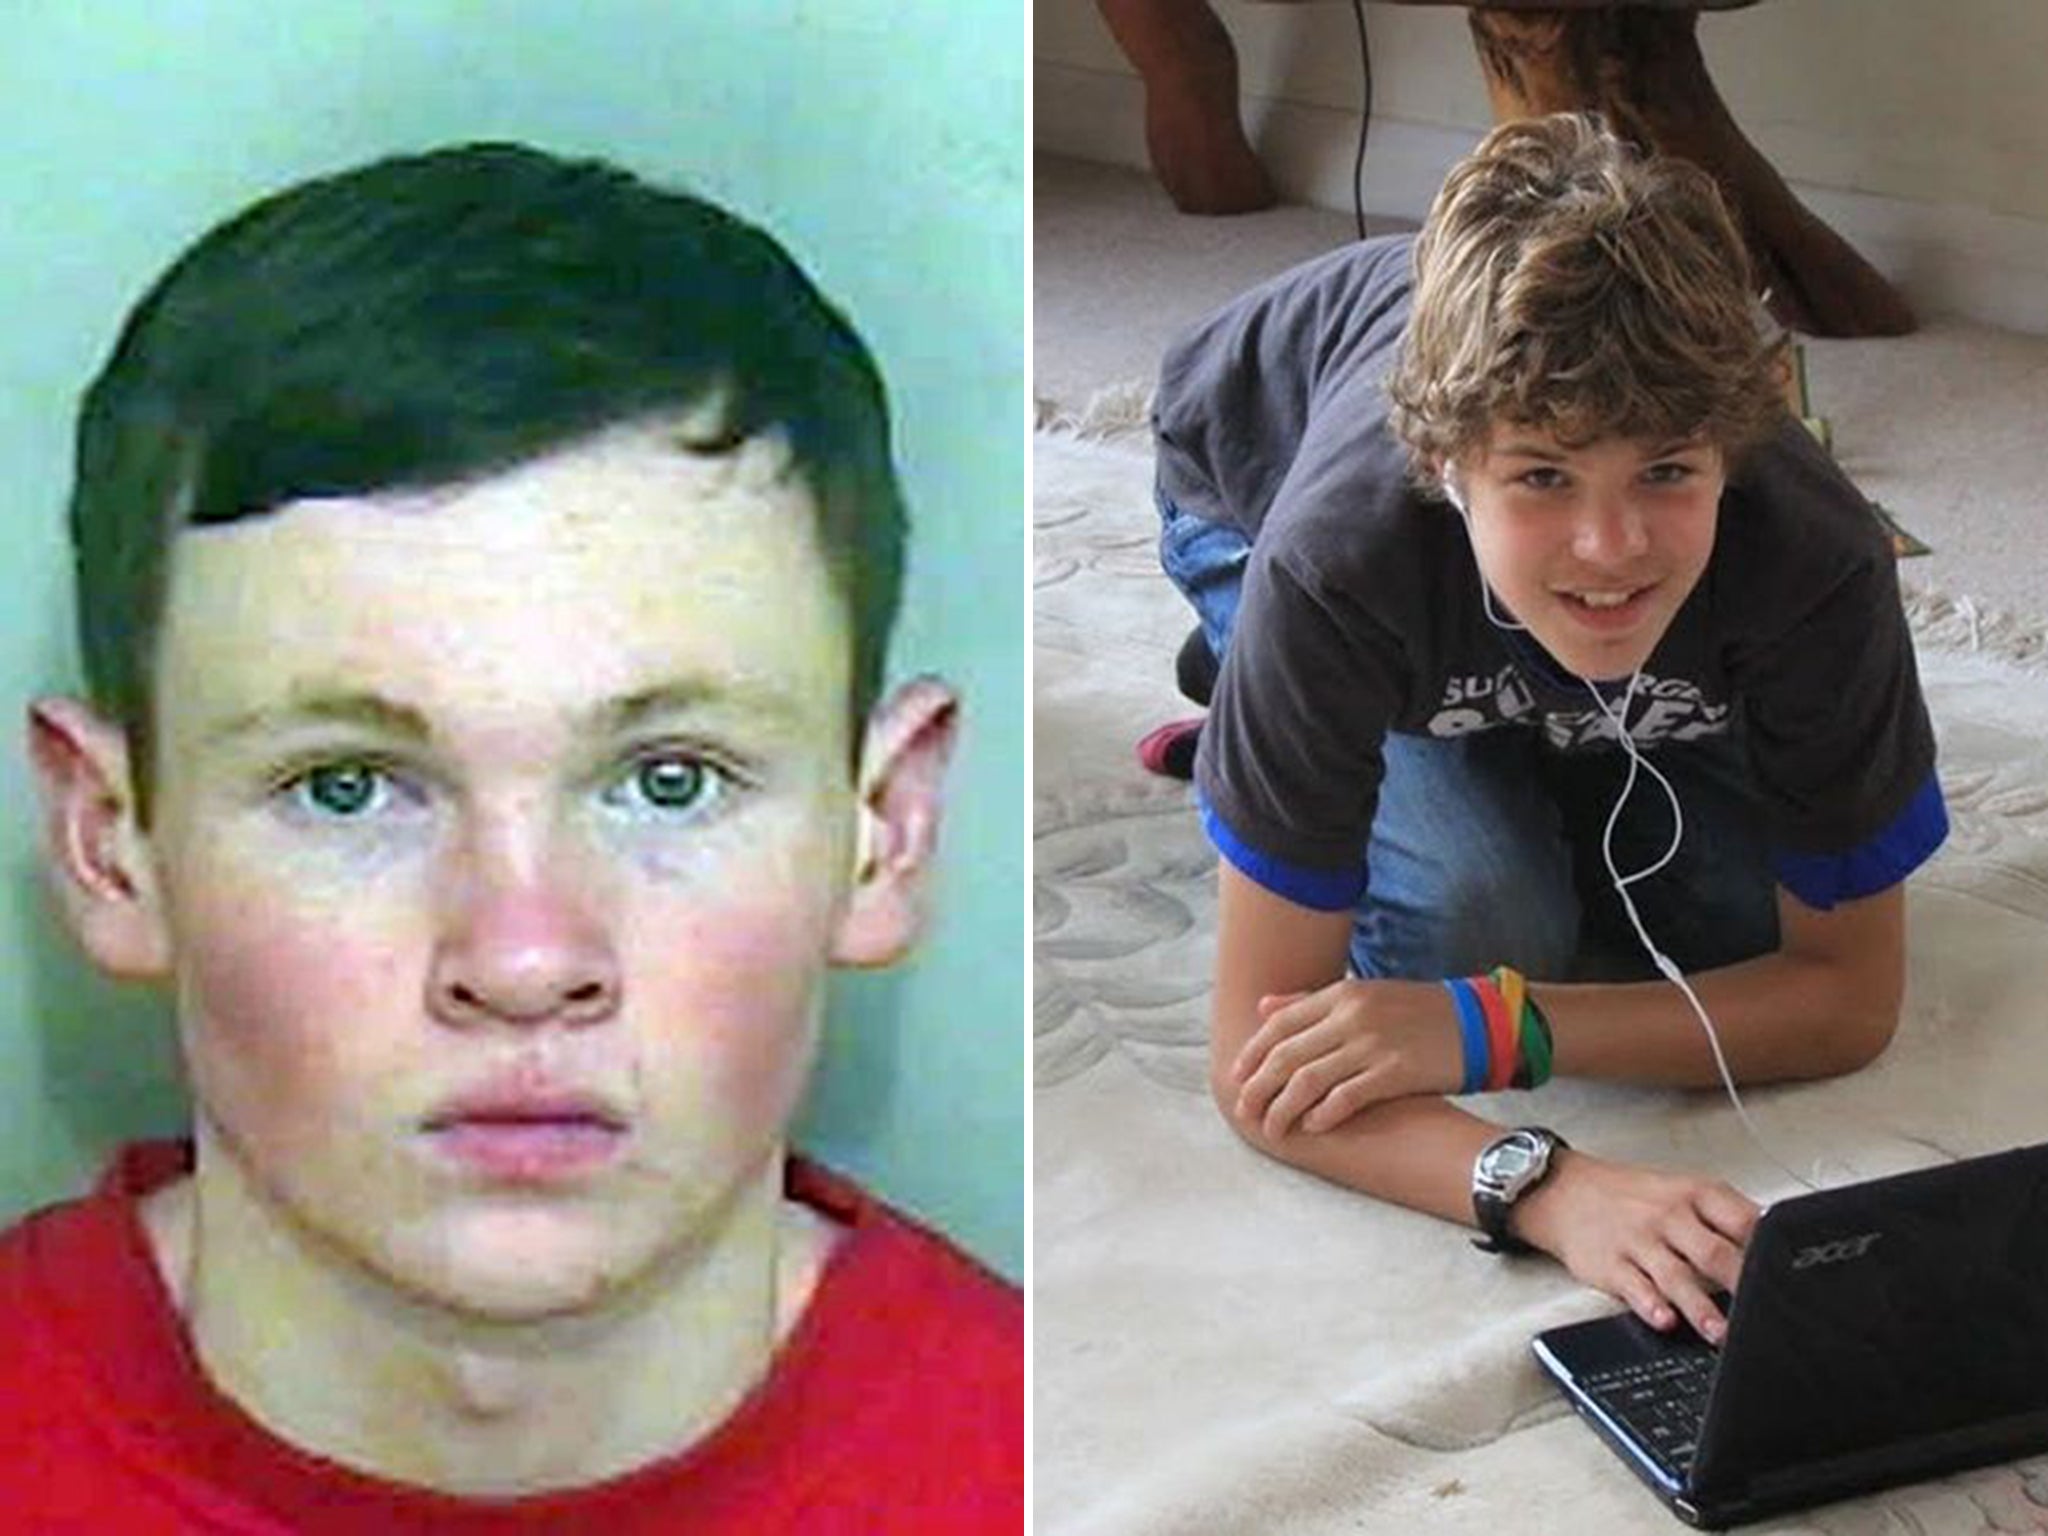 Lewis Daynes, left, was jailed for life for murdering 14-year-old Breck Bednar (PA)